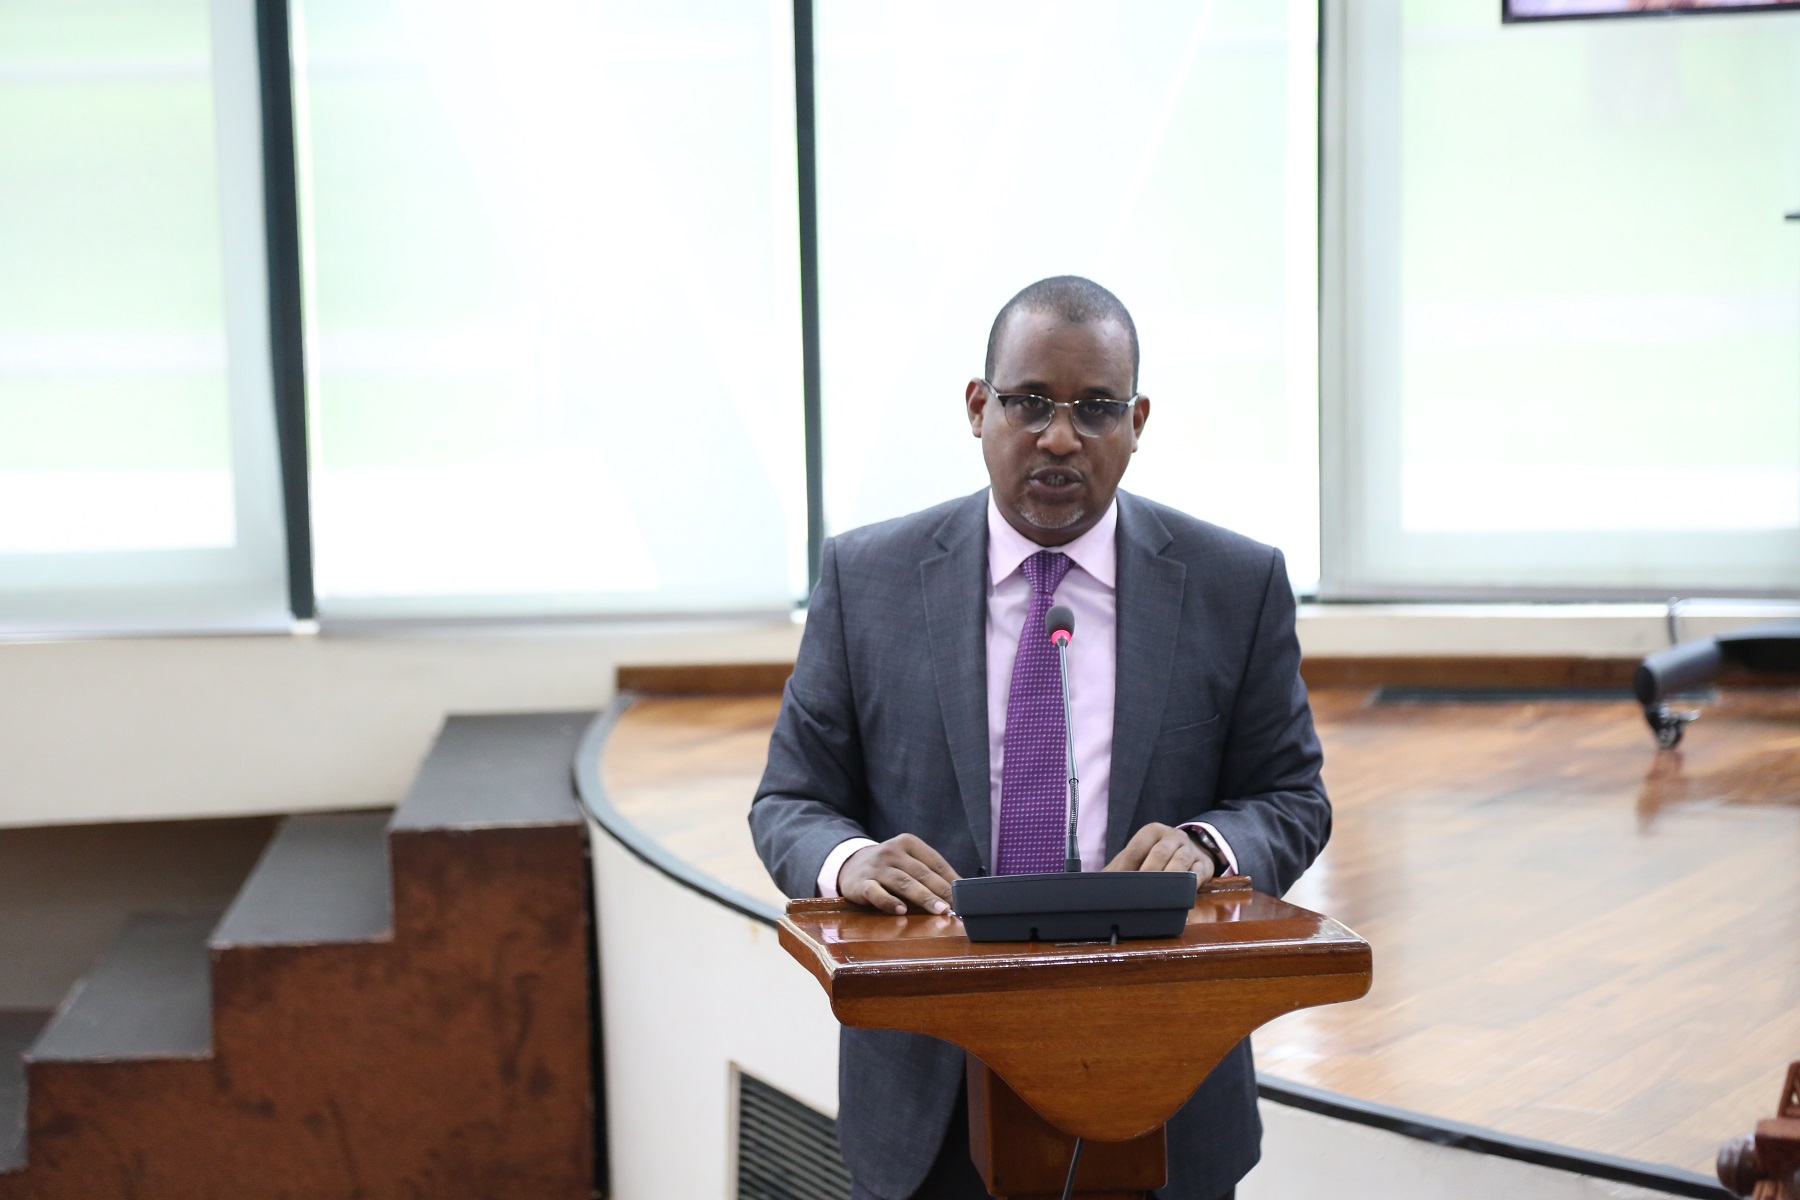 Chair of the Committee on General Purpose Committee, Hon Abdikadir O. Aden, presents the Committee's report on the EAC Supplementary Appropriation Bill, 2020.